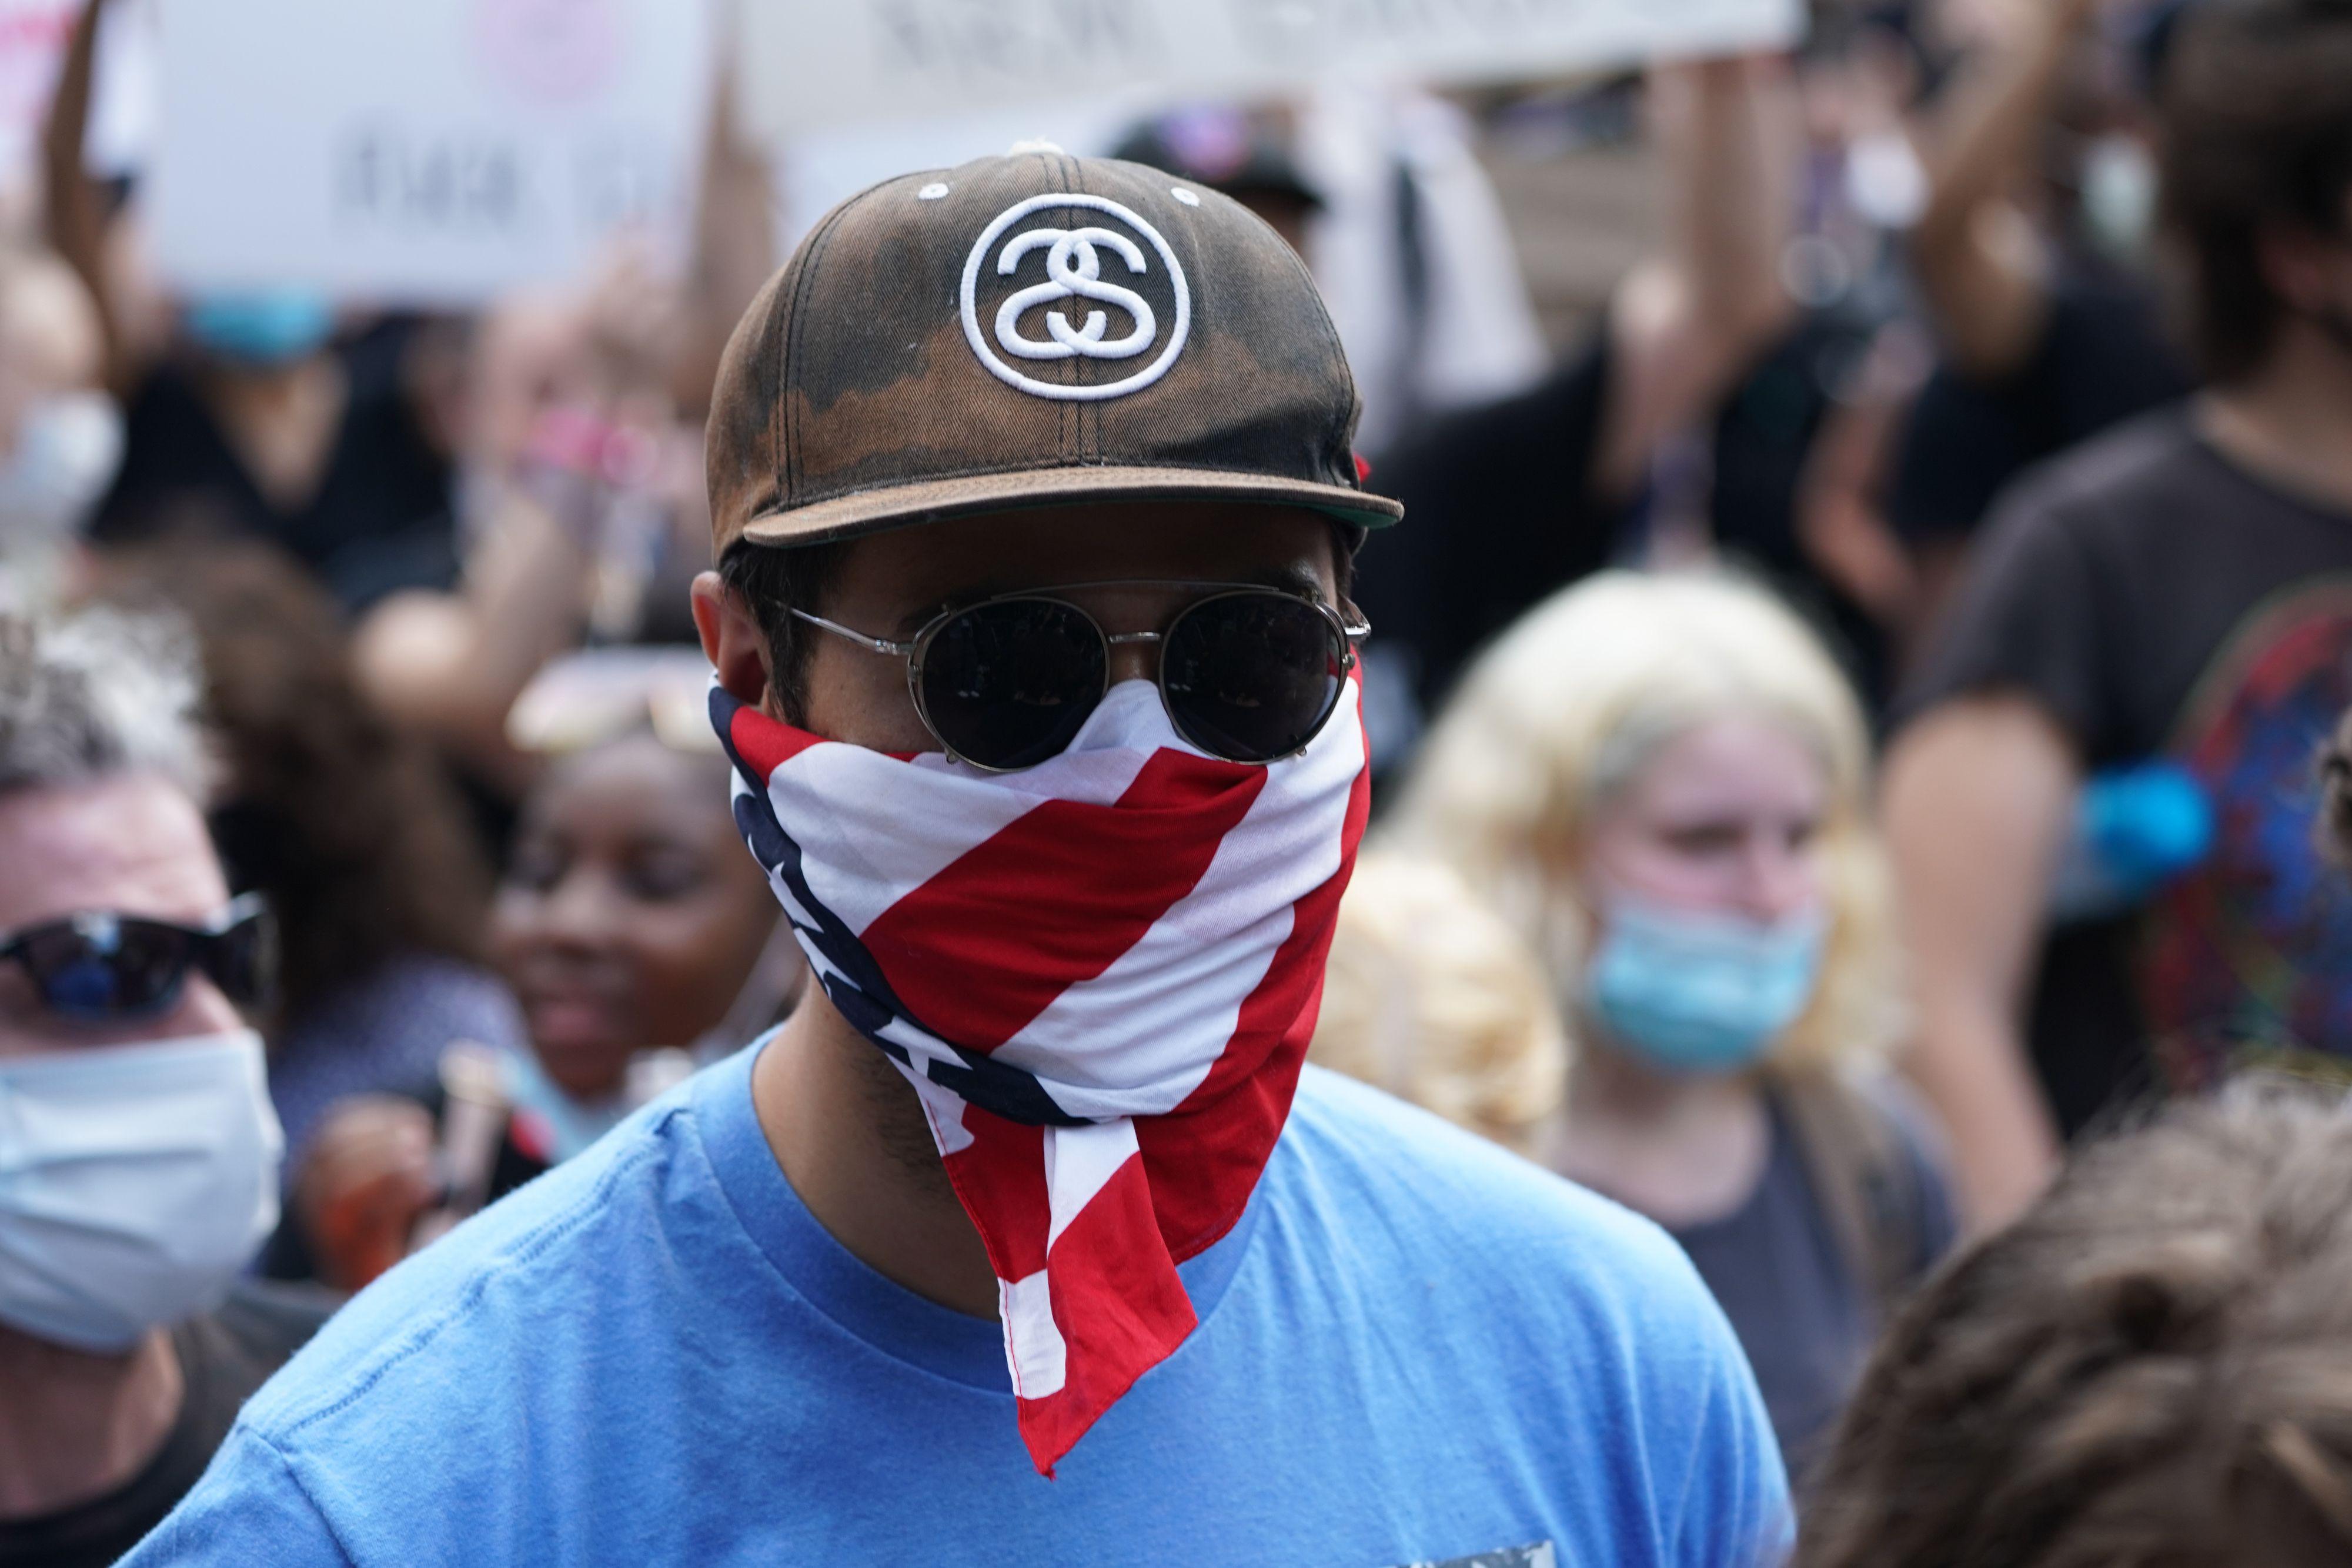 A protester wears a face mask that looks like an American flag.